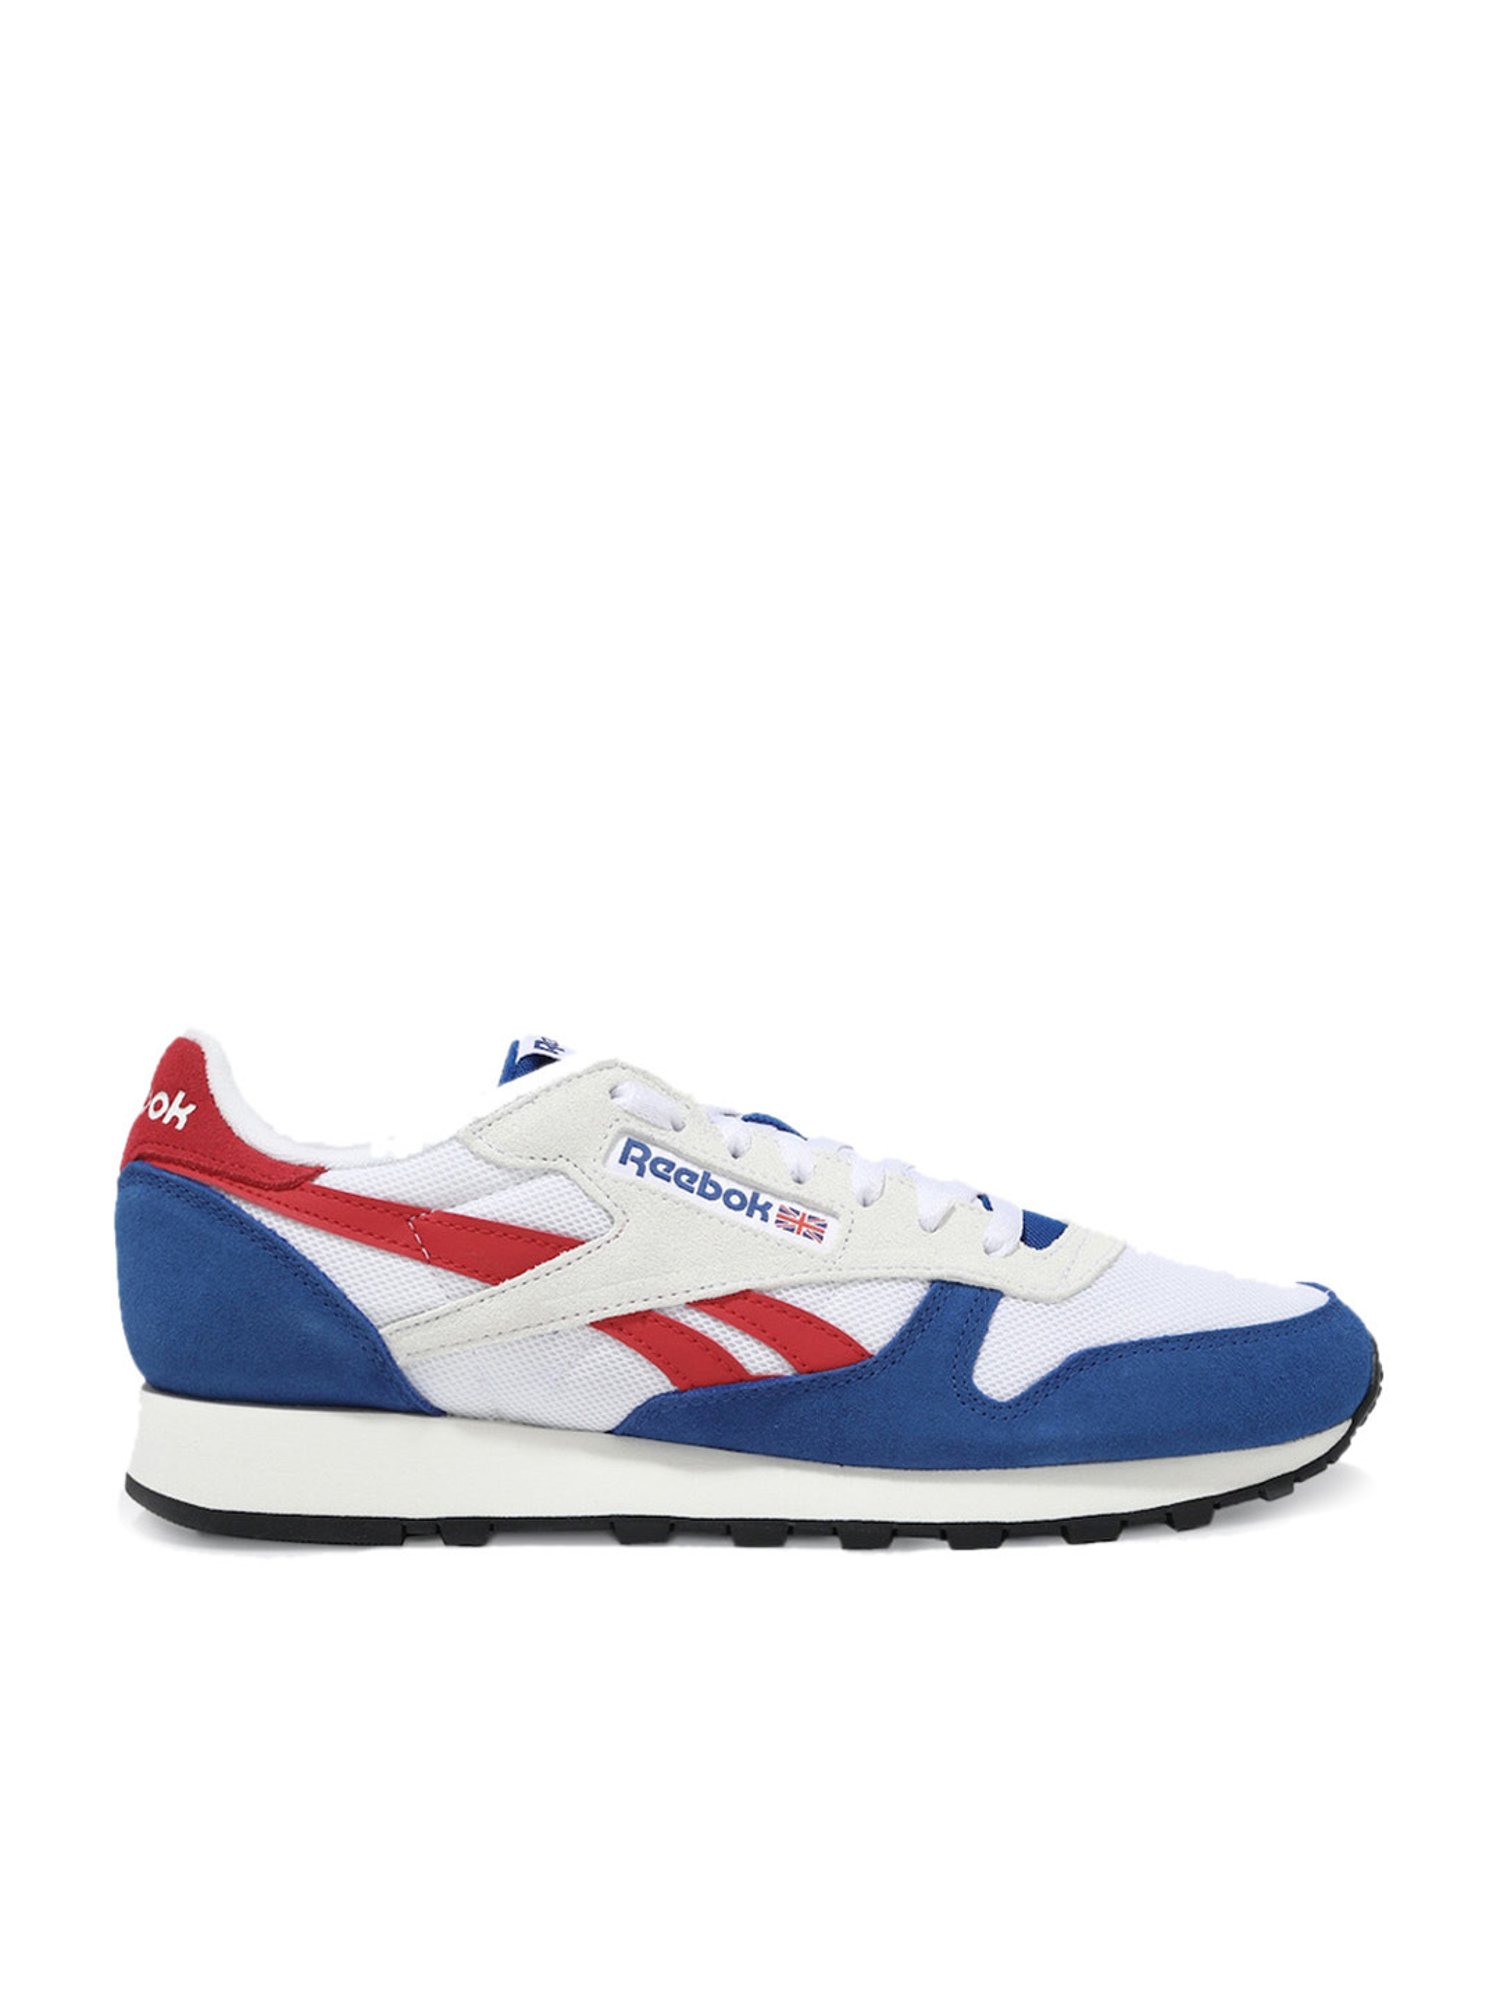 Men's shoes Reebok Classic Leather Vector Blue/ Soft White/ Vector Red |  Footshop